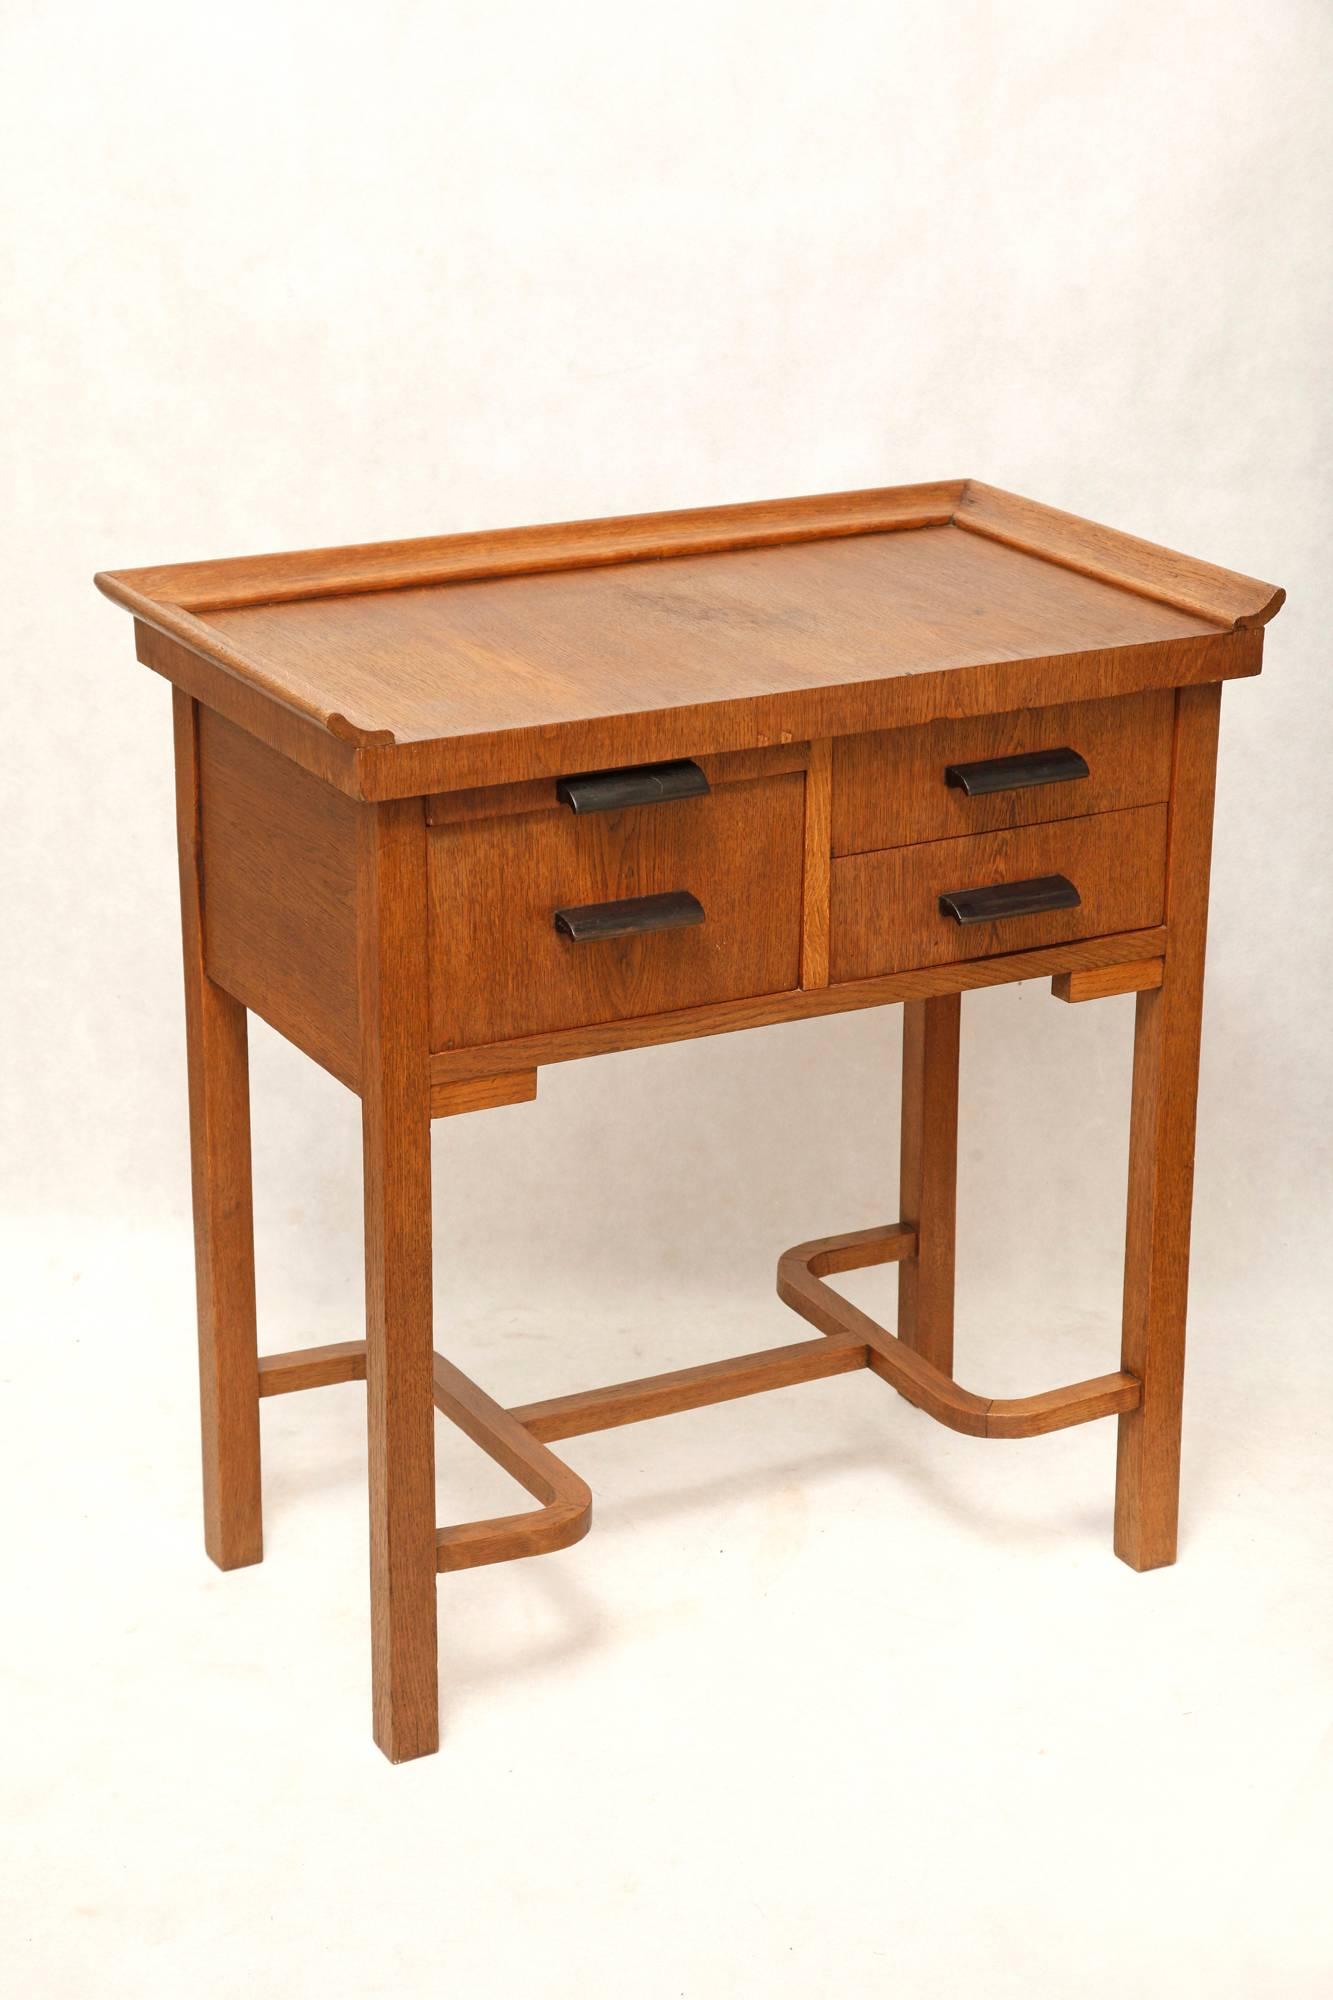 A multifunctional dressing table that can be used in several ways.
The idea for a dresser seems to be the most-struck because of the small compartments of drawers (drawers three pieces) and pull-out table top for various differences (photo). Also,